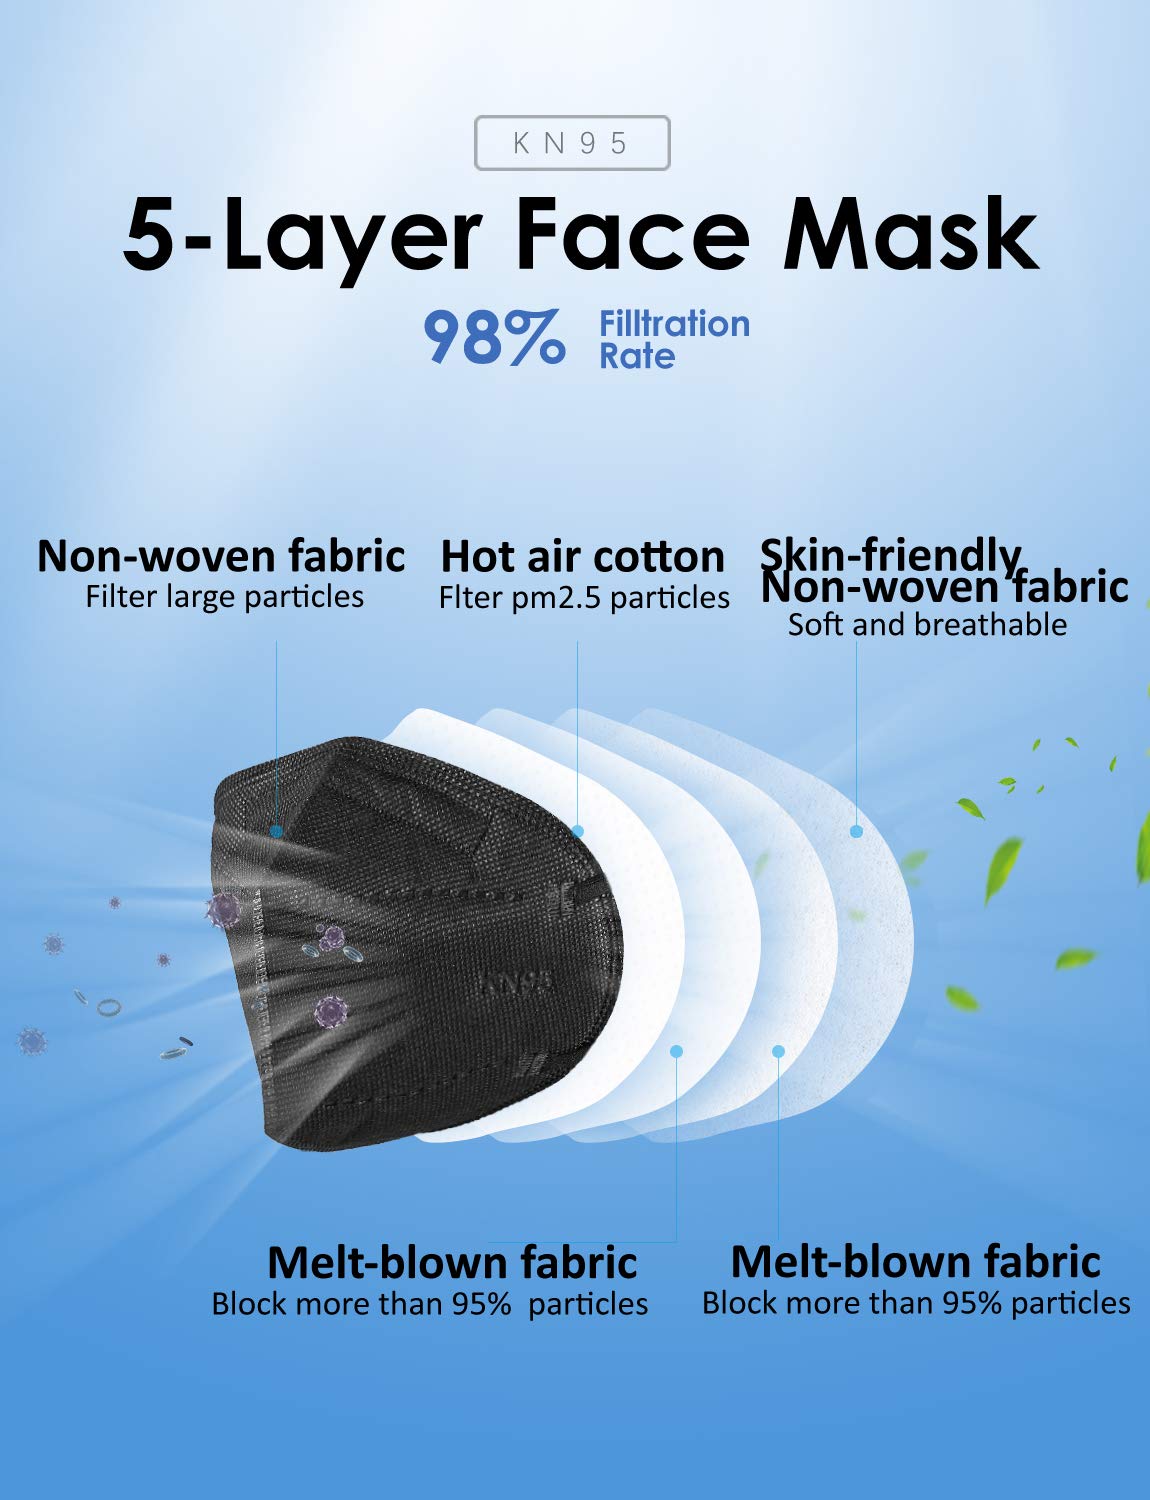 HUHETA KN95 Face Masks, Packs of 30 Individually Wrapped, 5-Ply Breathable and Comfortable Safety Mask, Filter Efficiency Over 95%, Protective Cup Dust Masks Against PM2.5 (Black Mask)